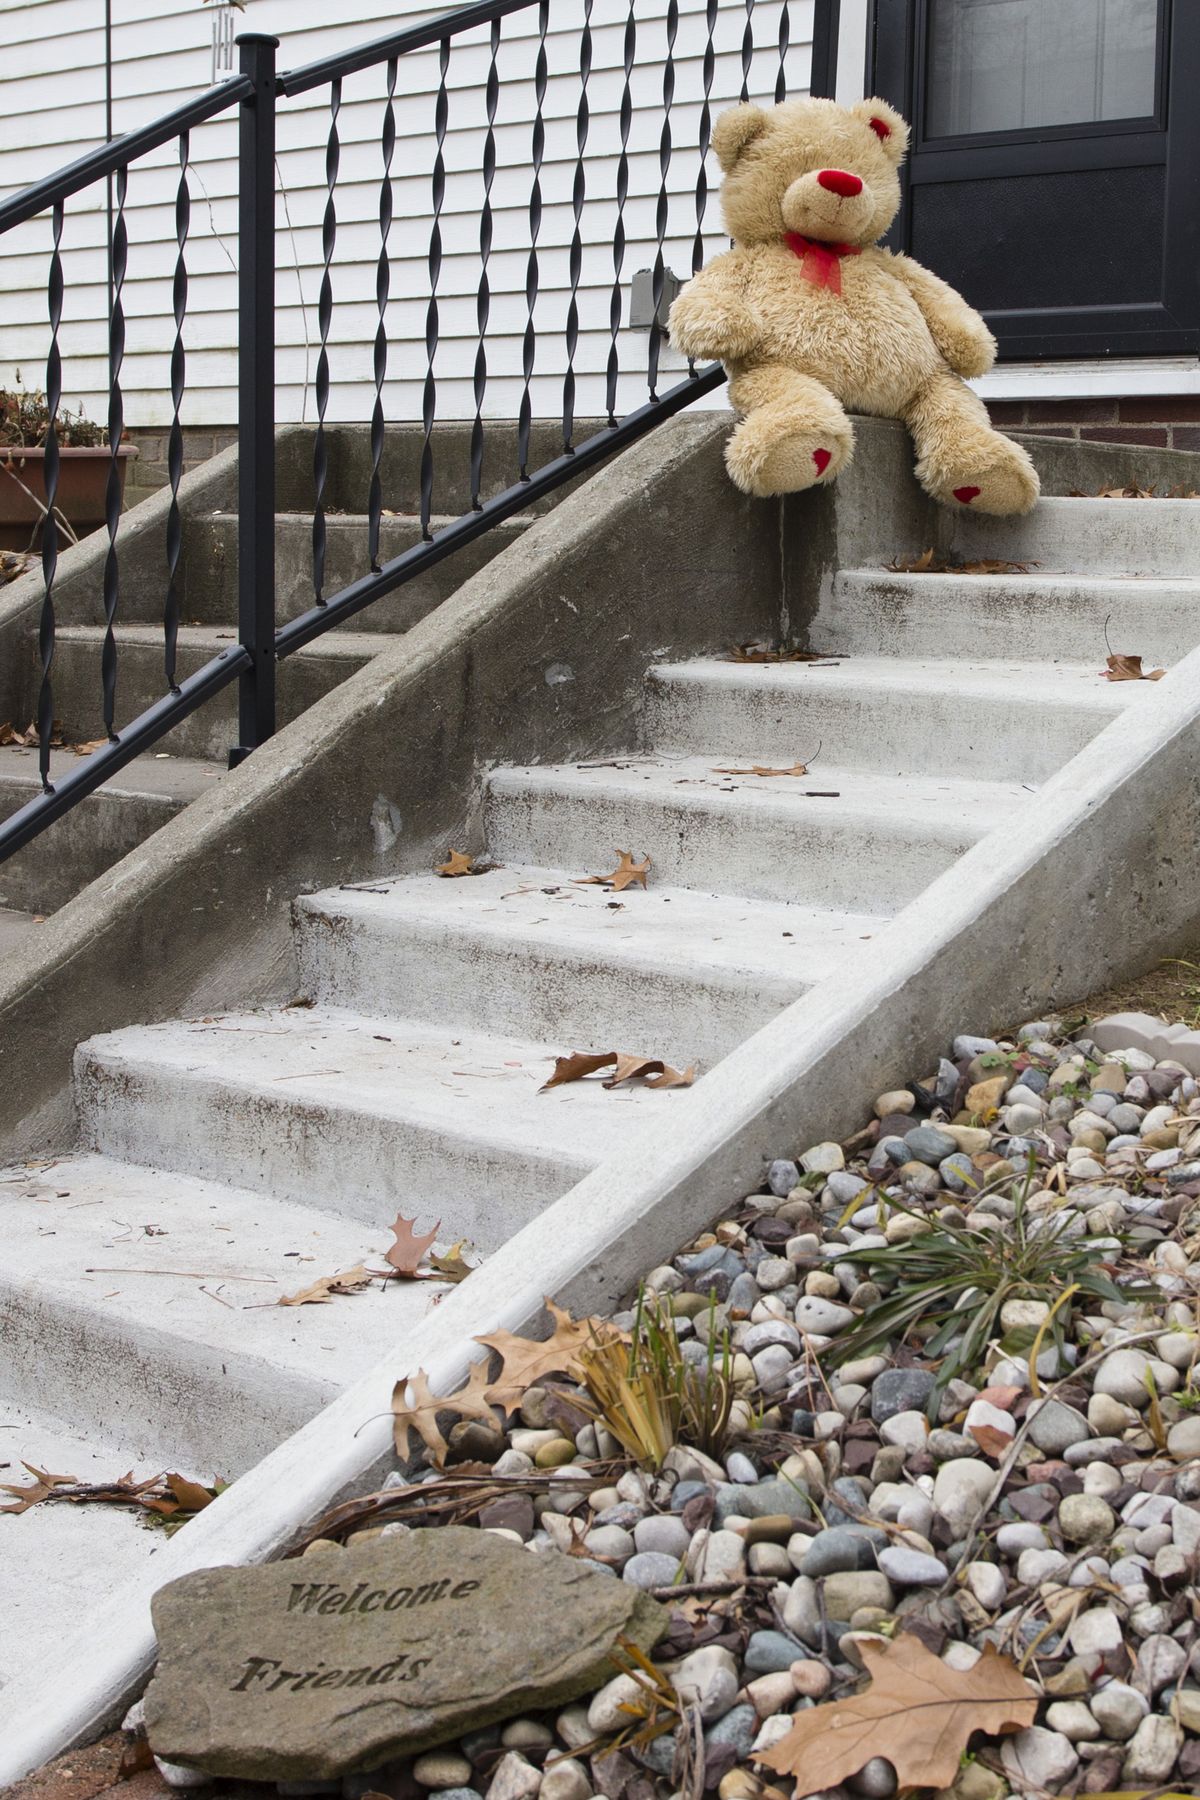 A lone teddy bear sits on the steps of the home where three children, their uncle, and their grandmother were found dead inside a garage Monday in what appears to be a murder-suicide amid a custody dispute in Toledo, Ohio, Tuesday, Nov. 13, 2012. (Rick Osentoski / Fr170444 Ap)